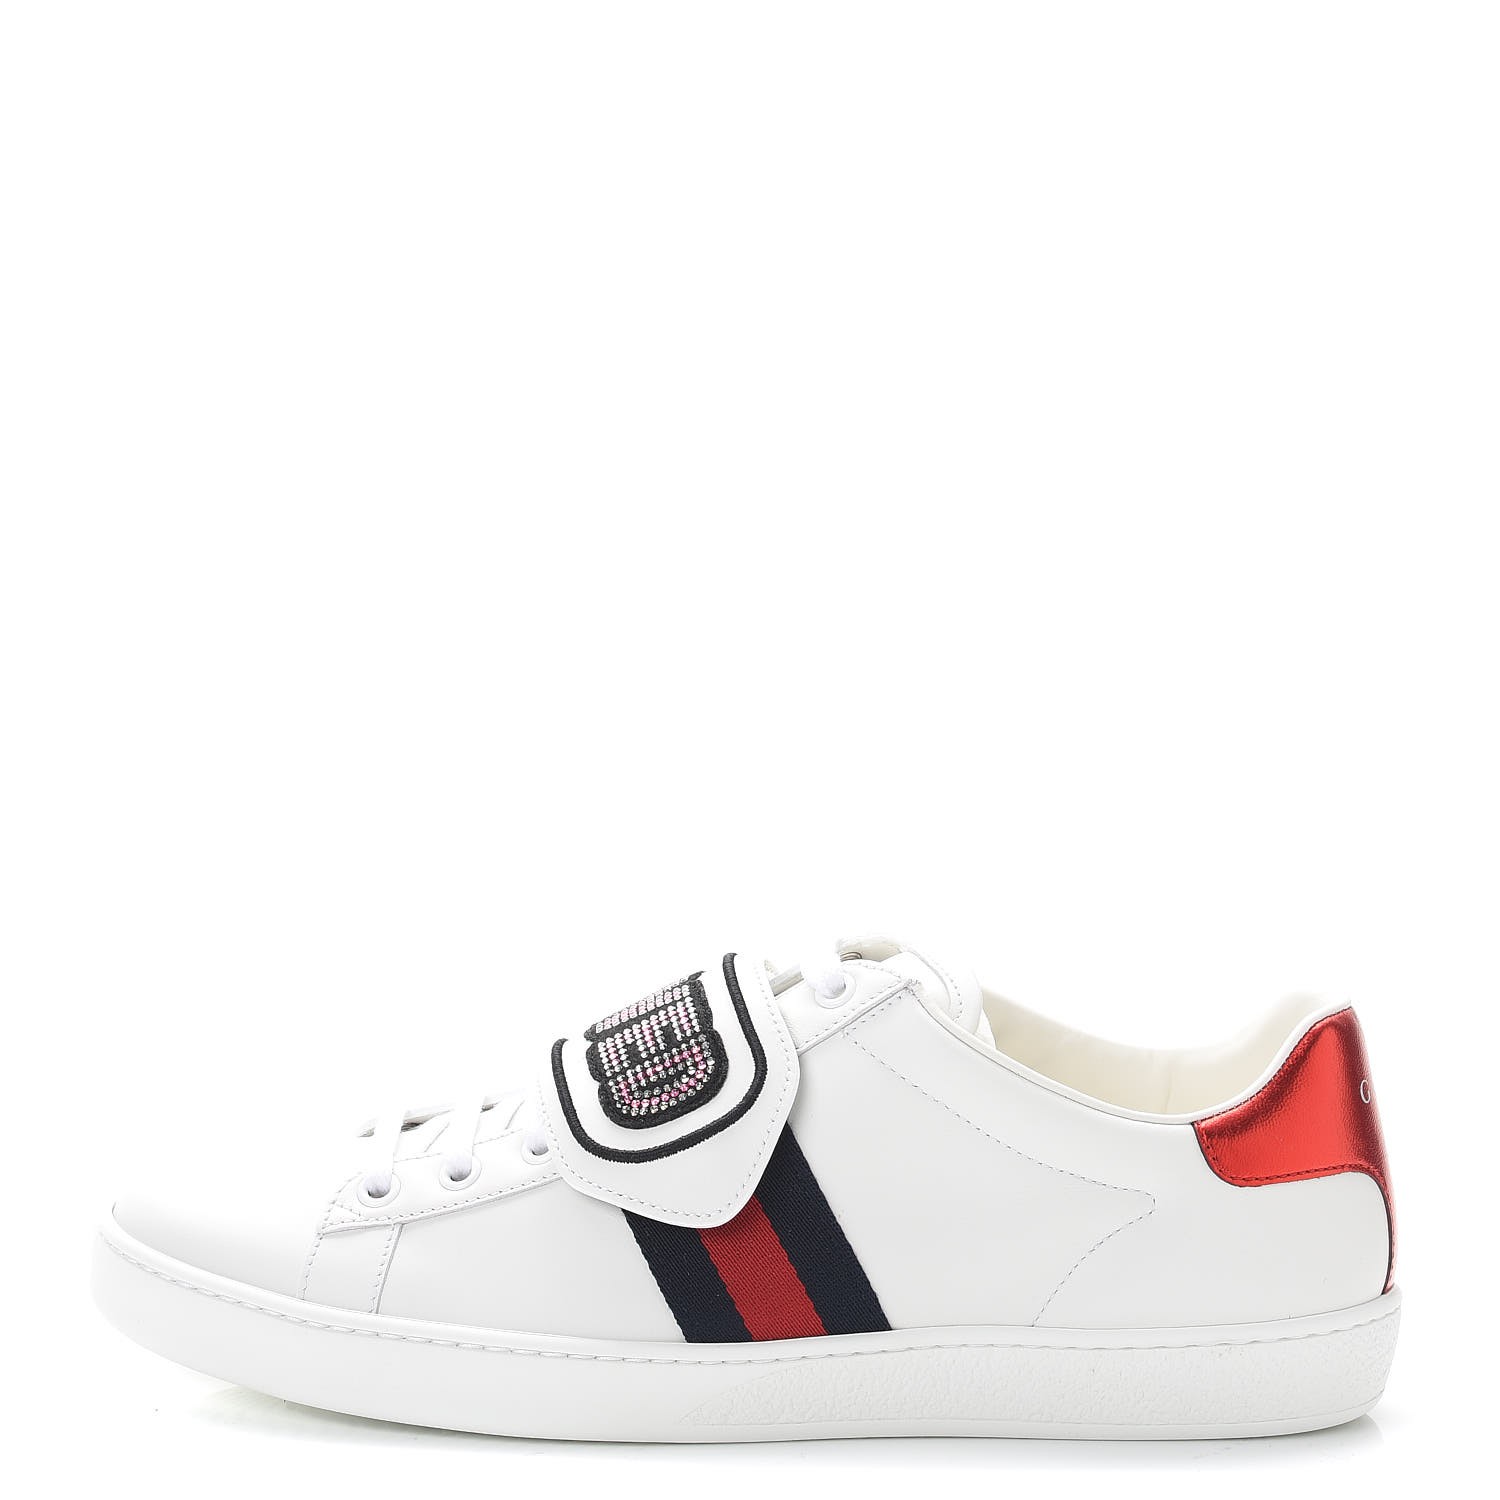 GUCCI Calfskin Ayers Crystal New Ace Loved Sneakers 40.5 White 258057